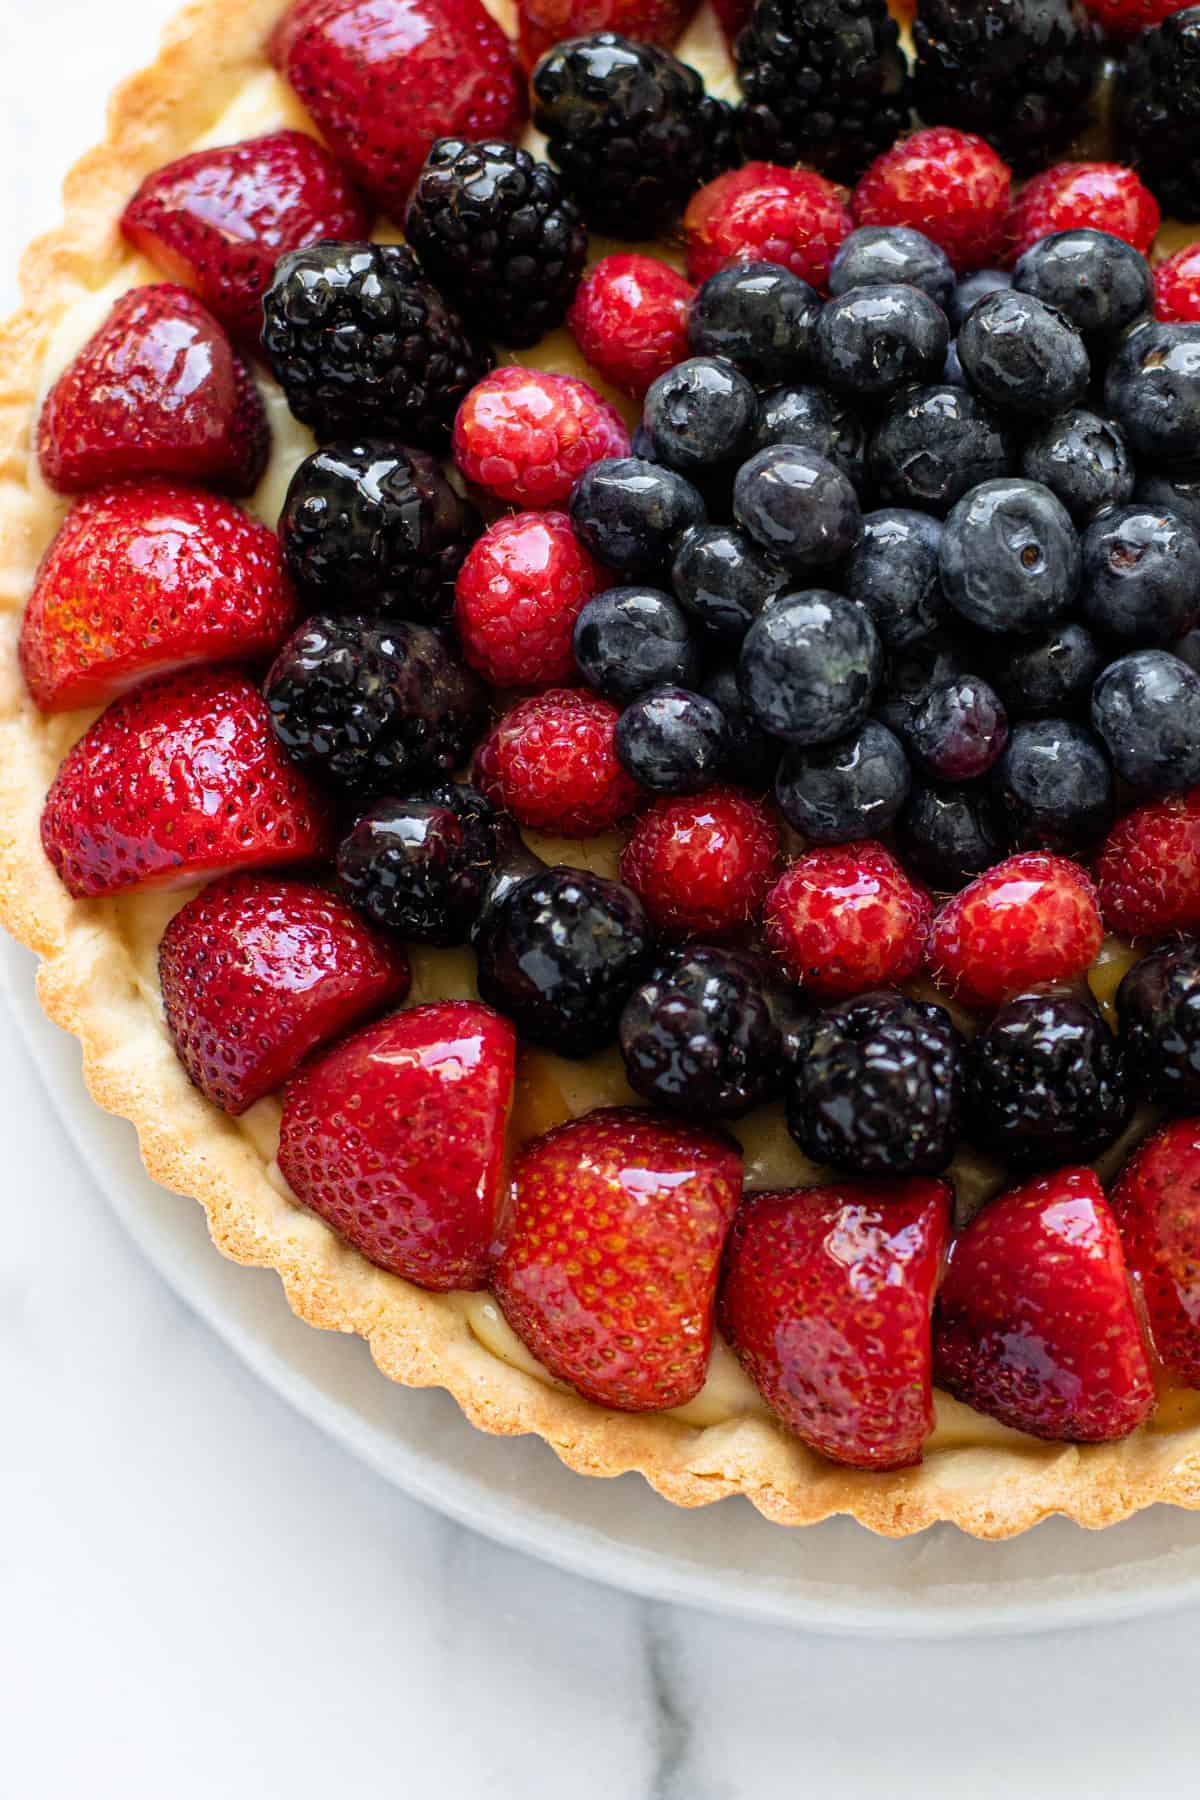 A glazed fresh fruit tart filled to the top with berries.